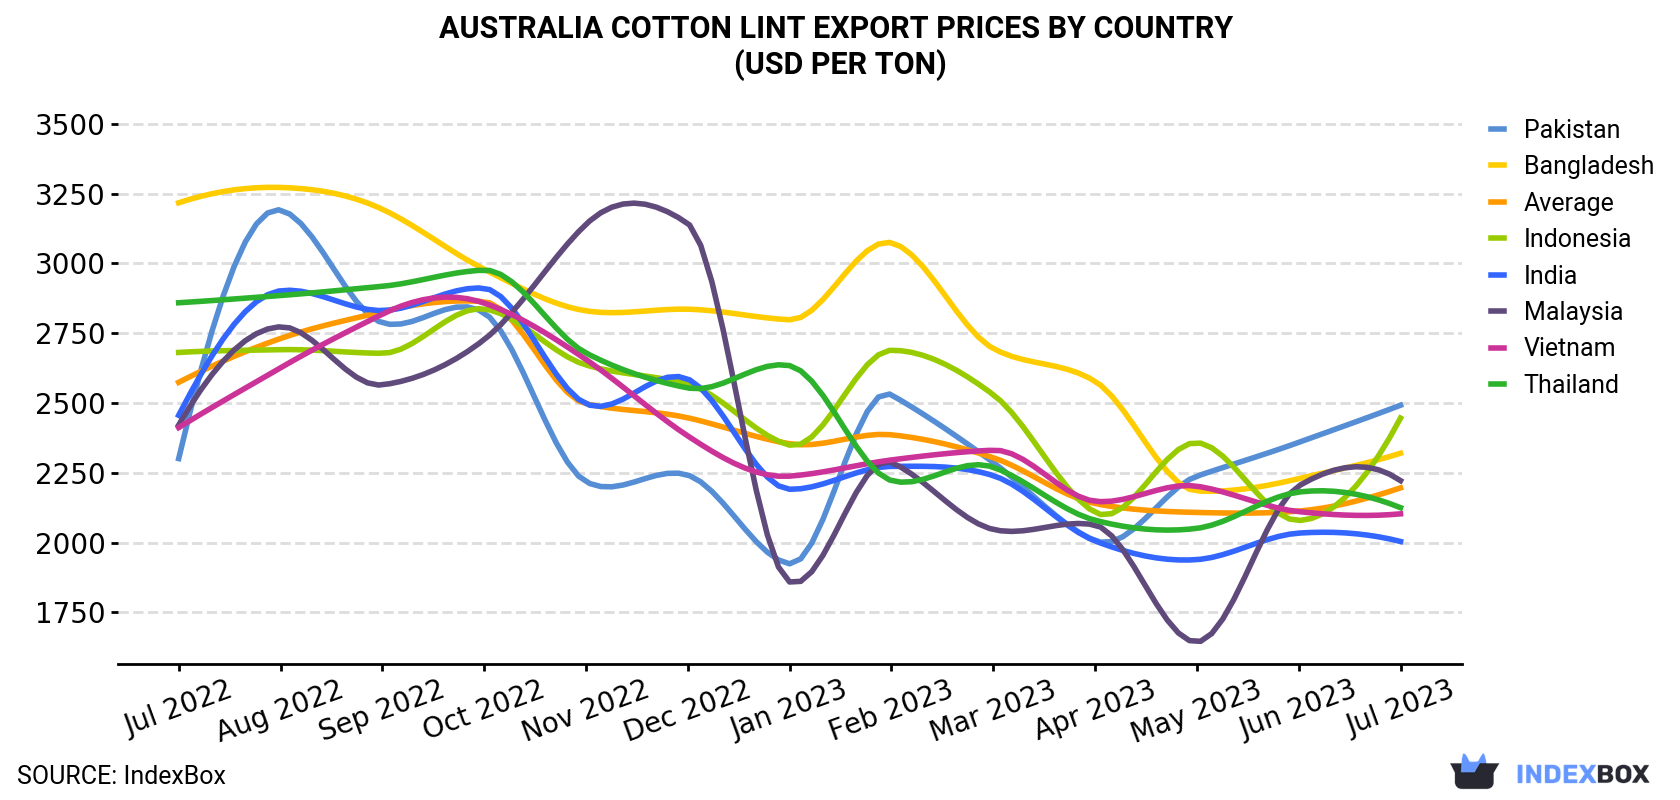 Australia Cotton Lint Export Prices By Country (USD Per Ton)